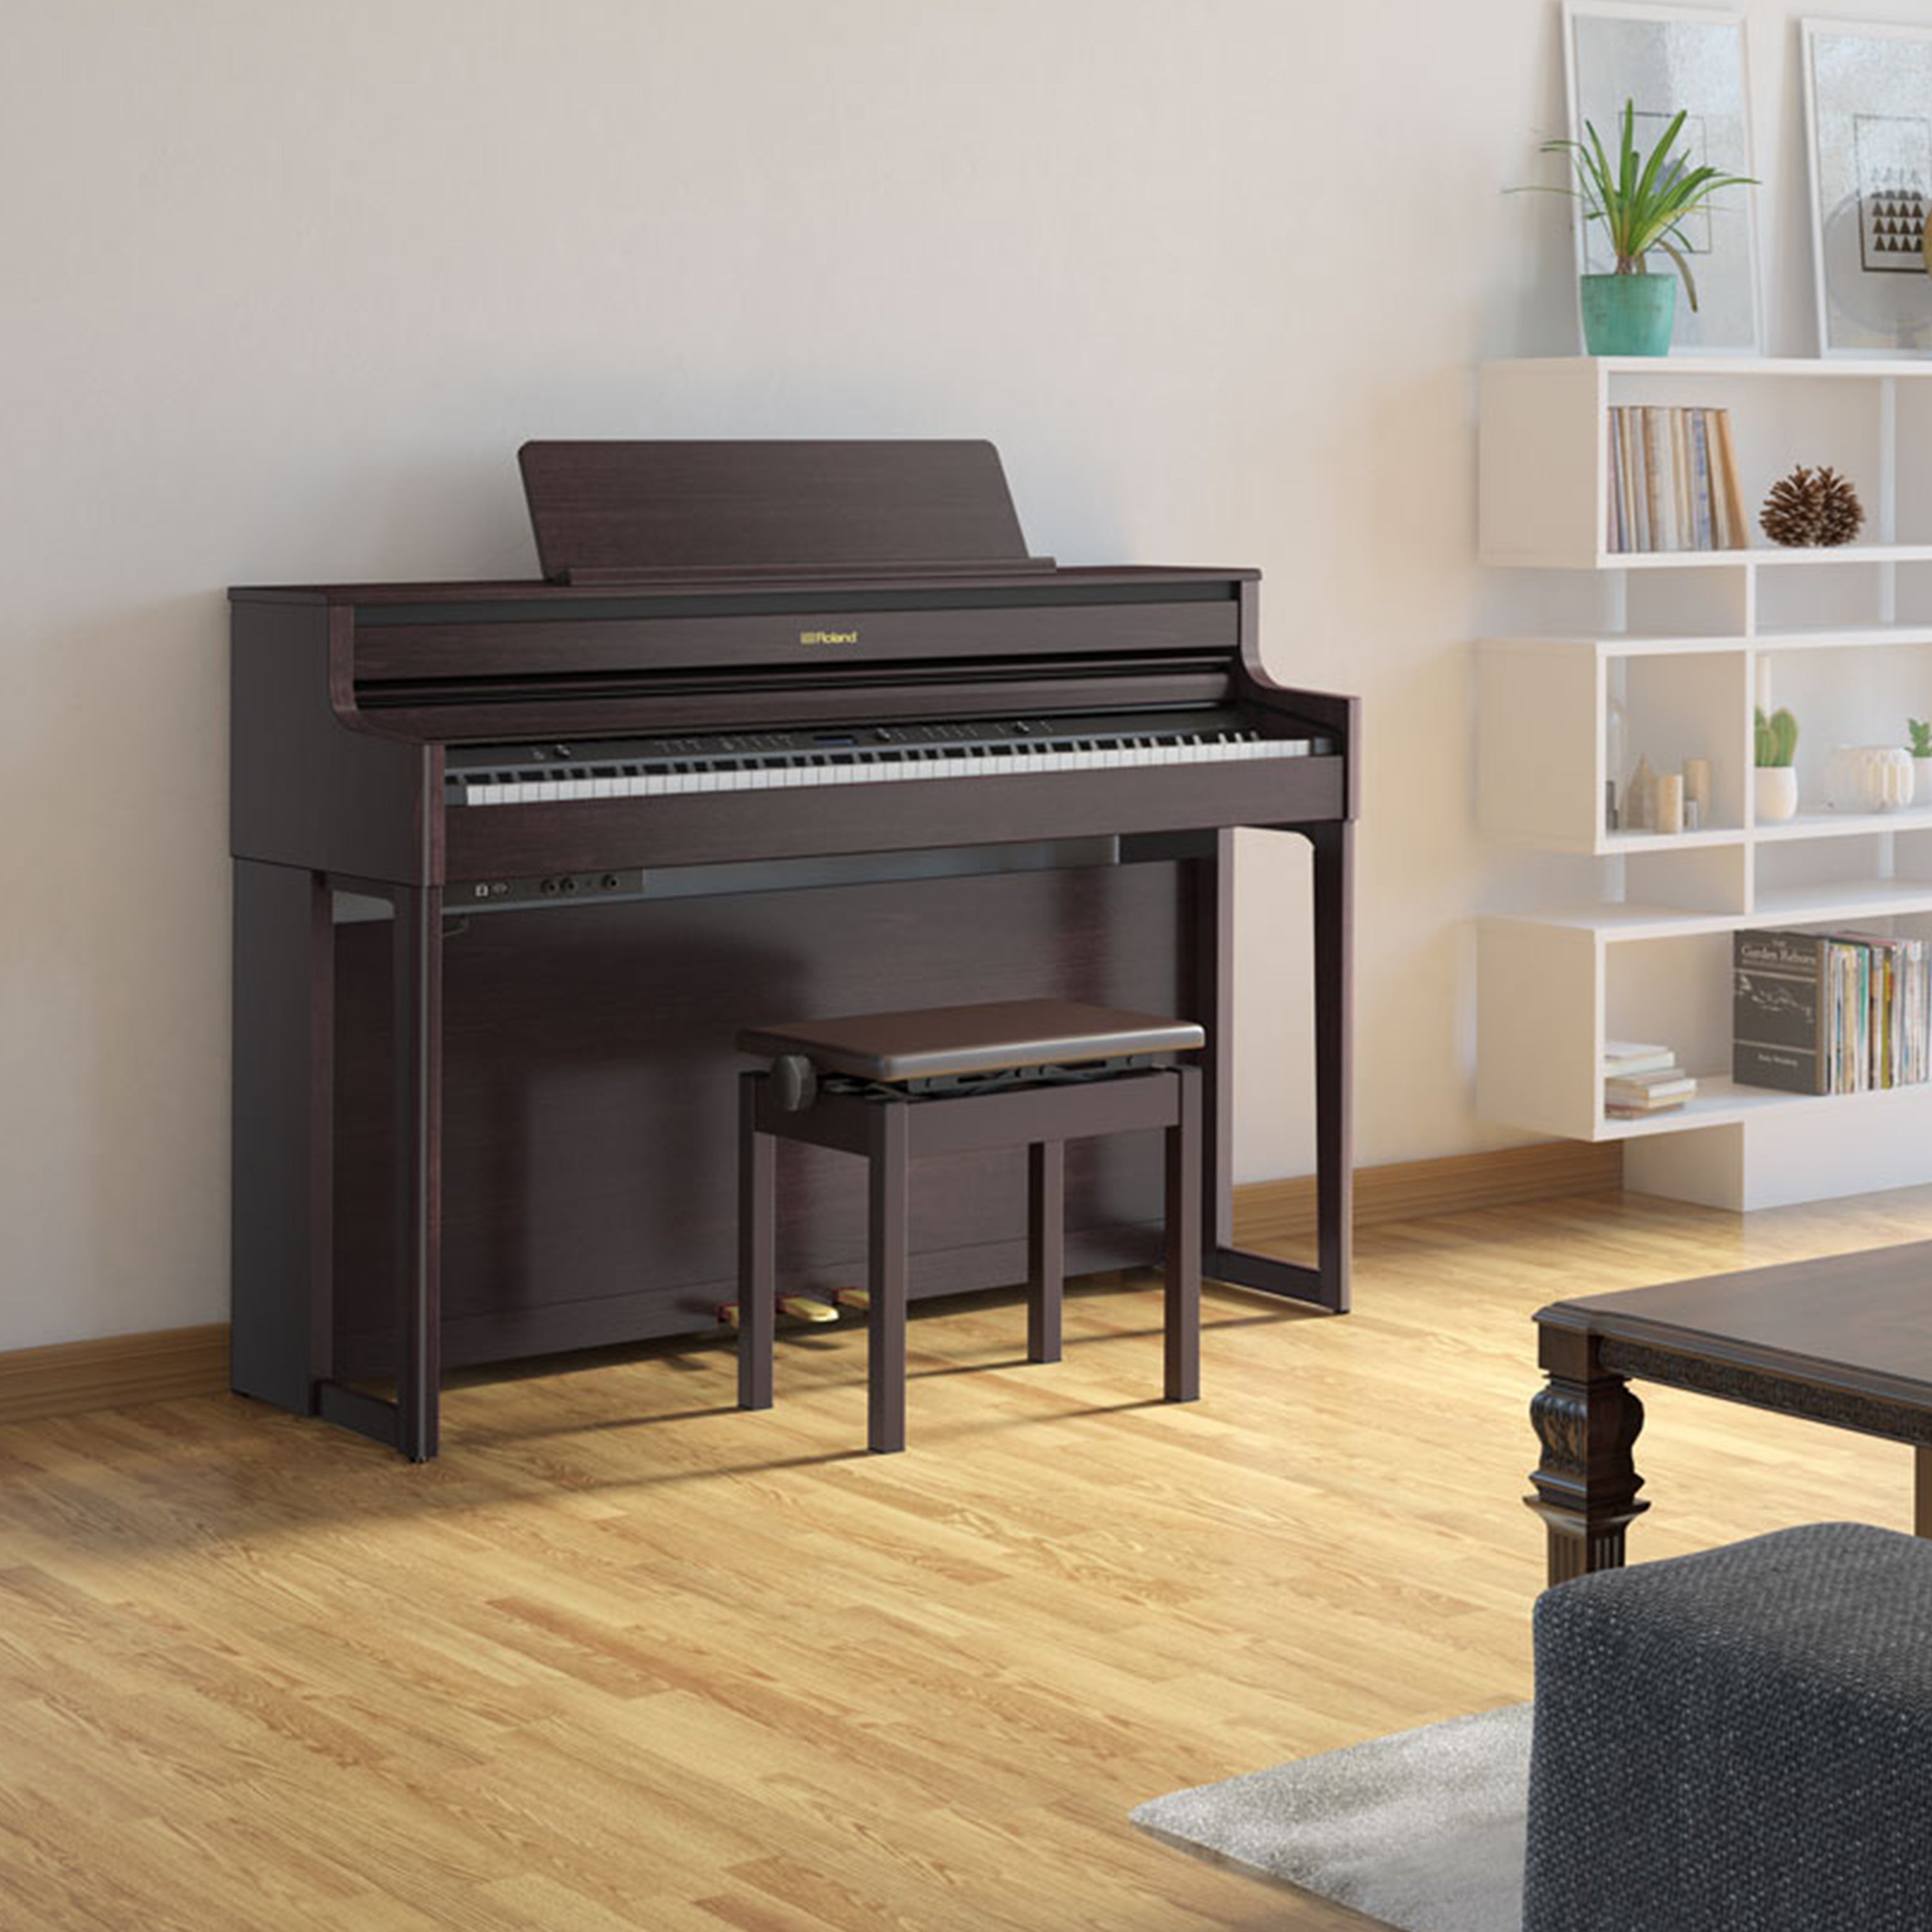 Roland HP704 Digital Piano - Dark Rosewood - in a stylish living room